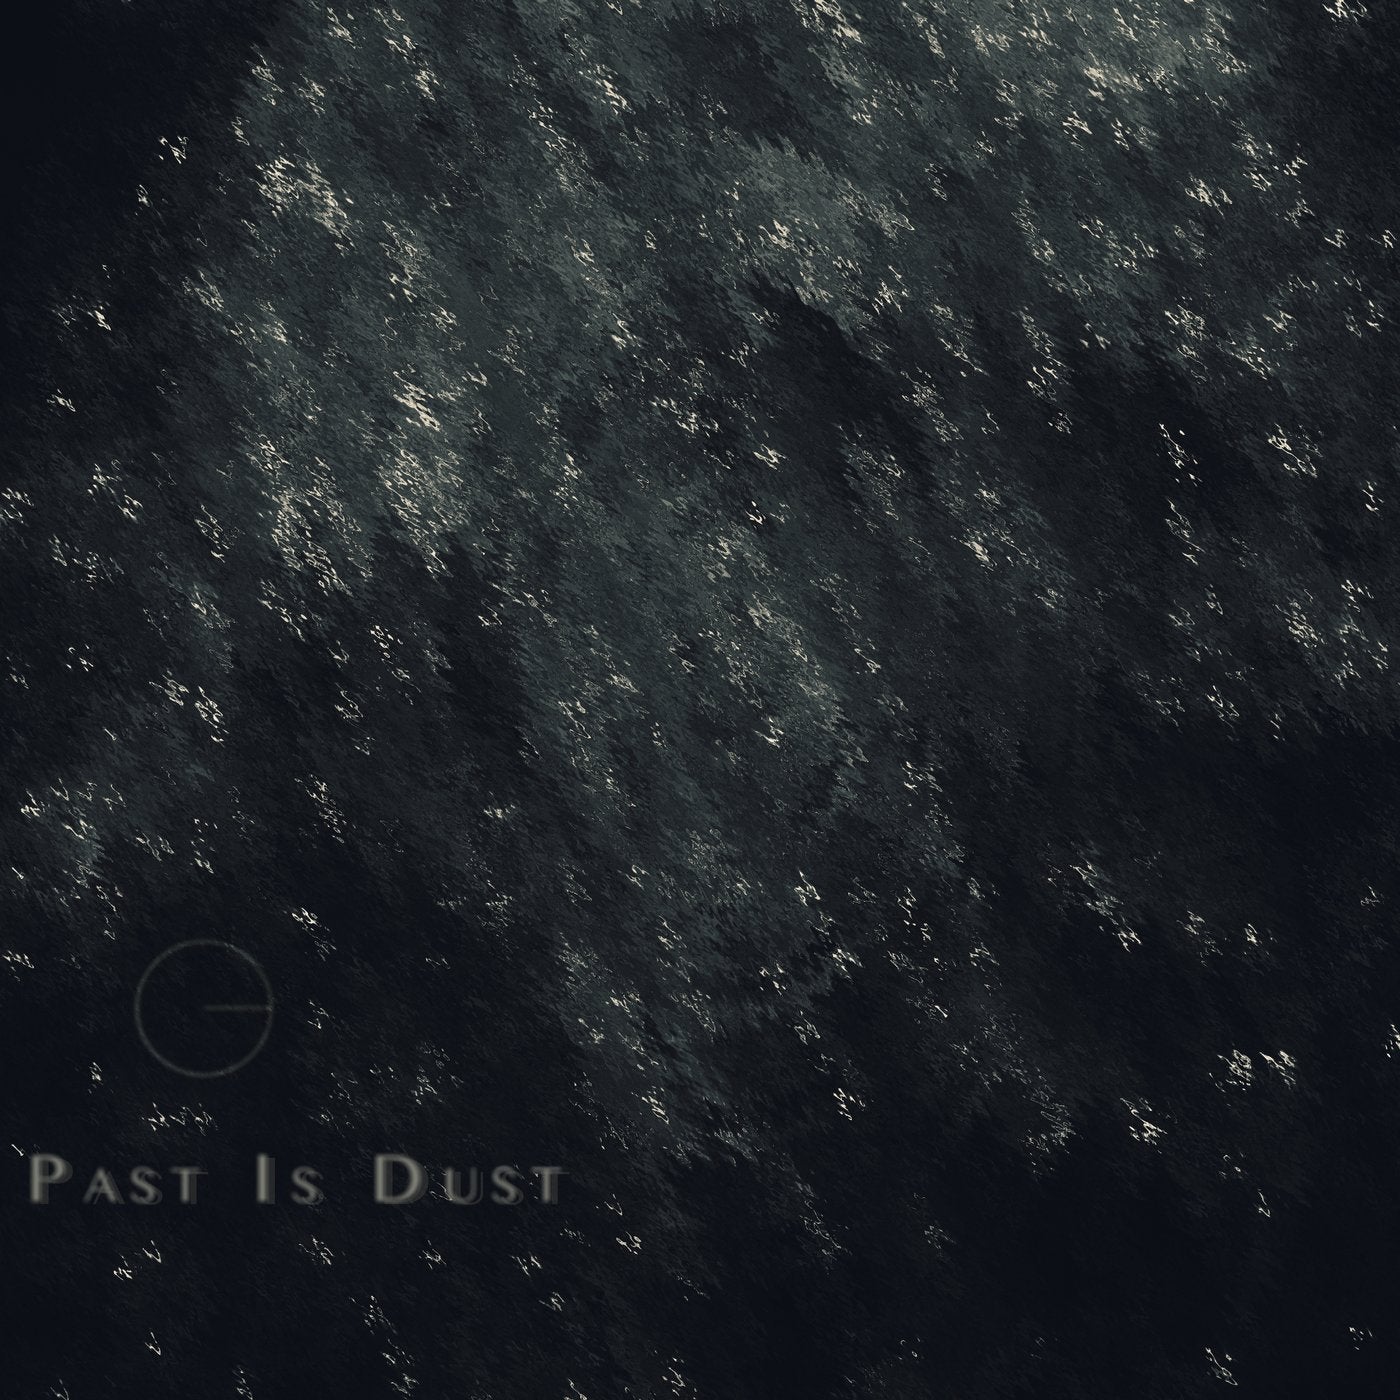 Past Is Dust